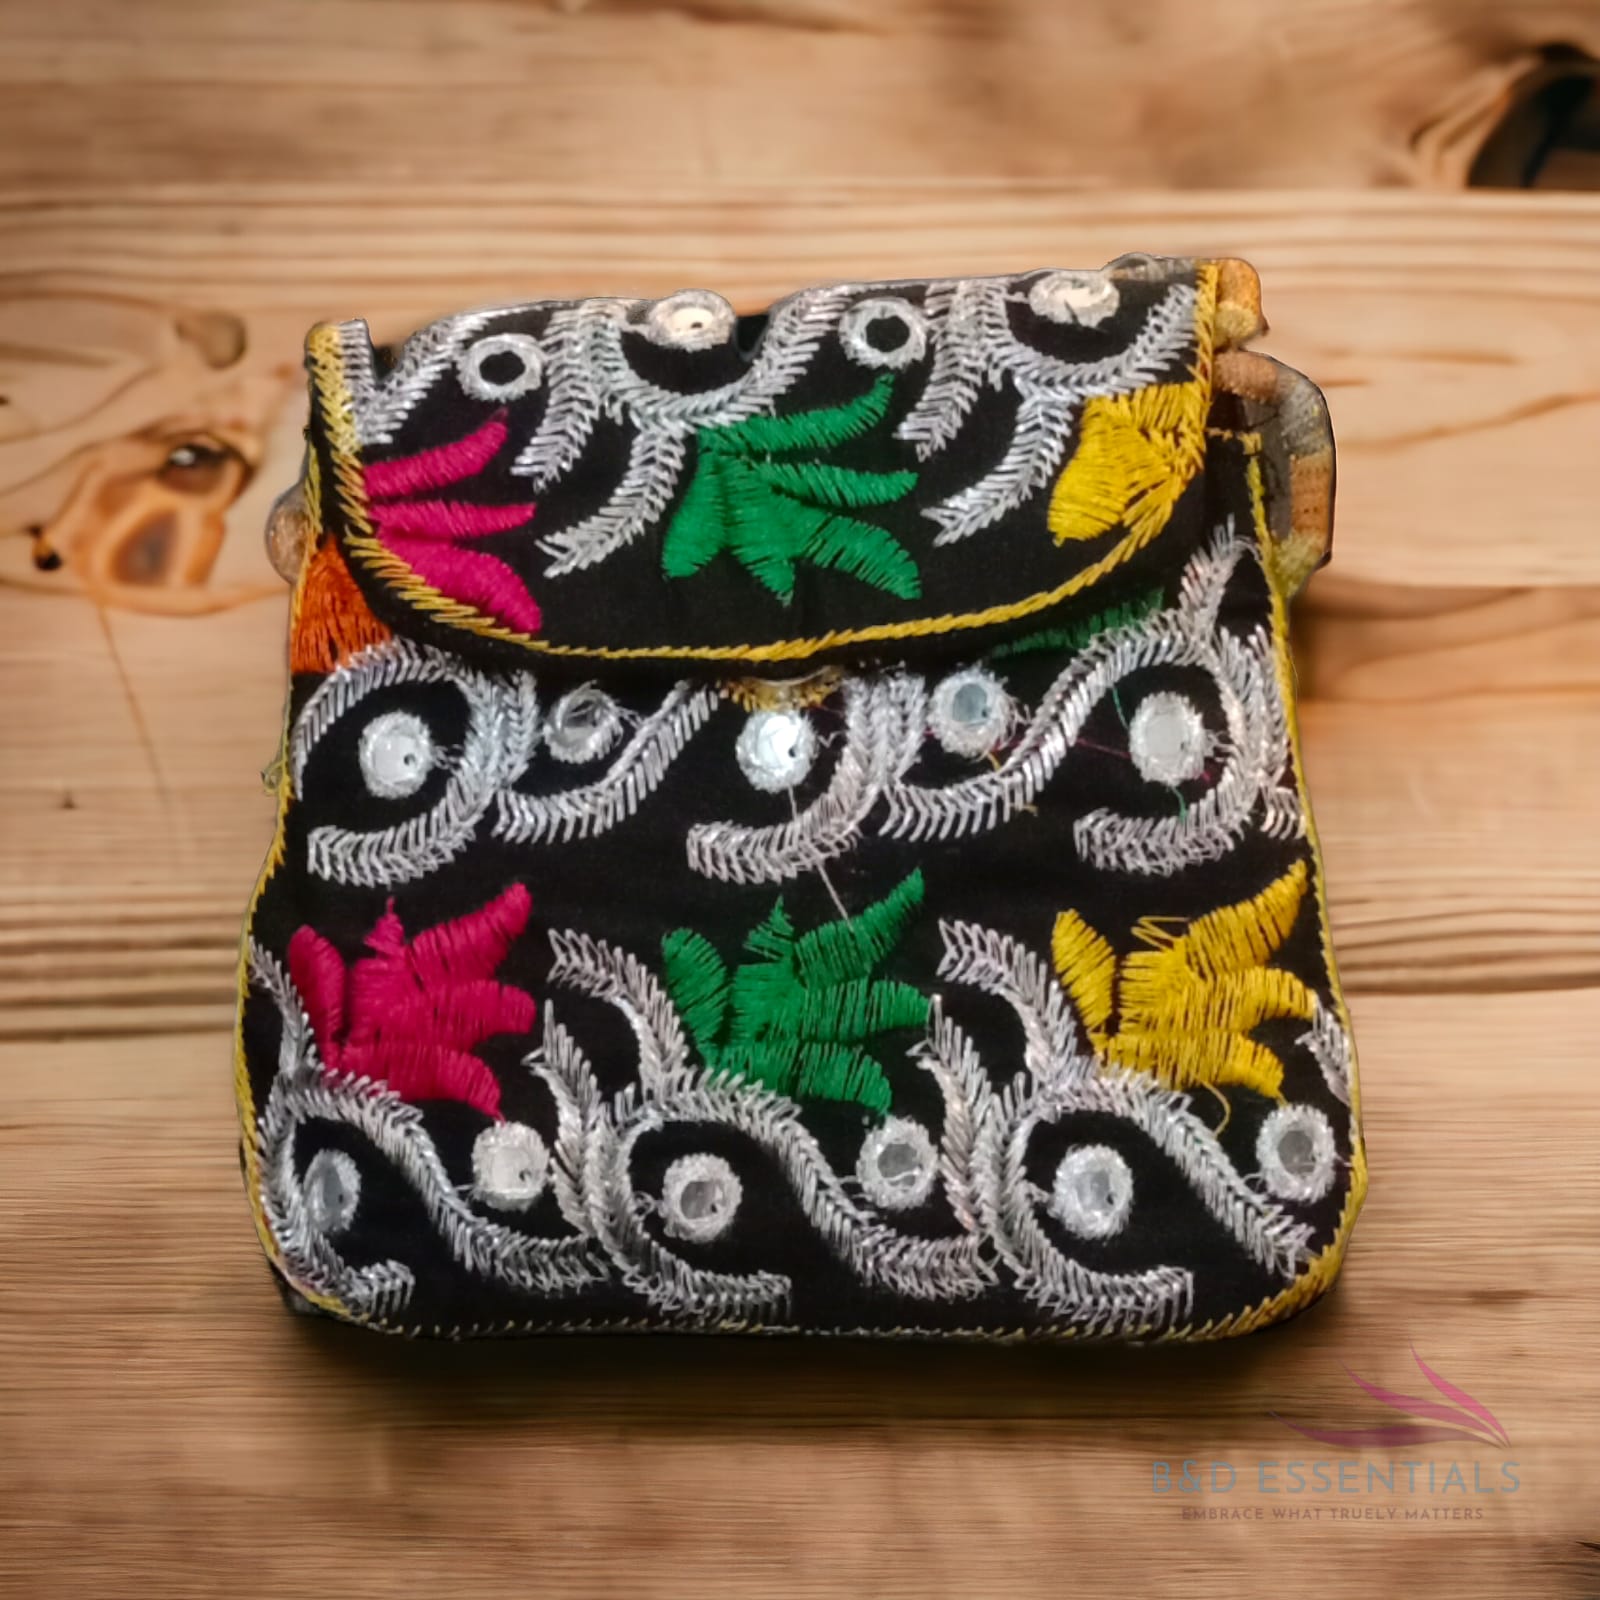 Traditional Pakistani Handcrafted Embroidered Purse - Vibrant Multicolor Shoulder Bag for Women, Ideal for Cultural Events and Parties - Random Designs